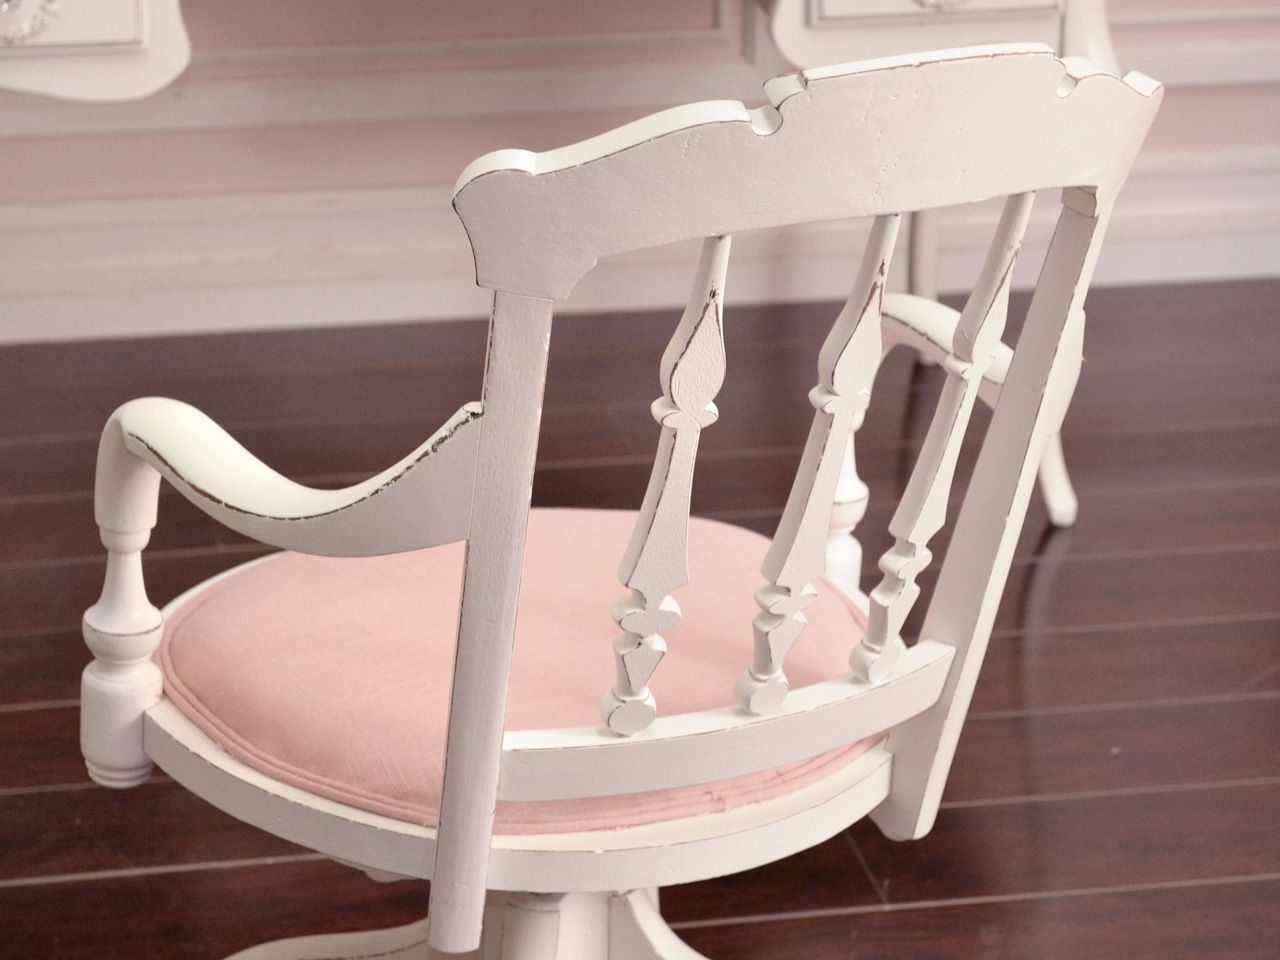 Pink Swivel Chairs Ideas on Foter